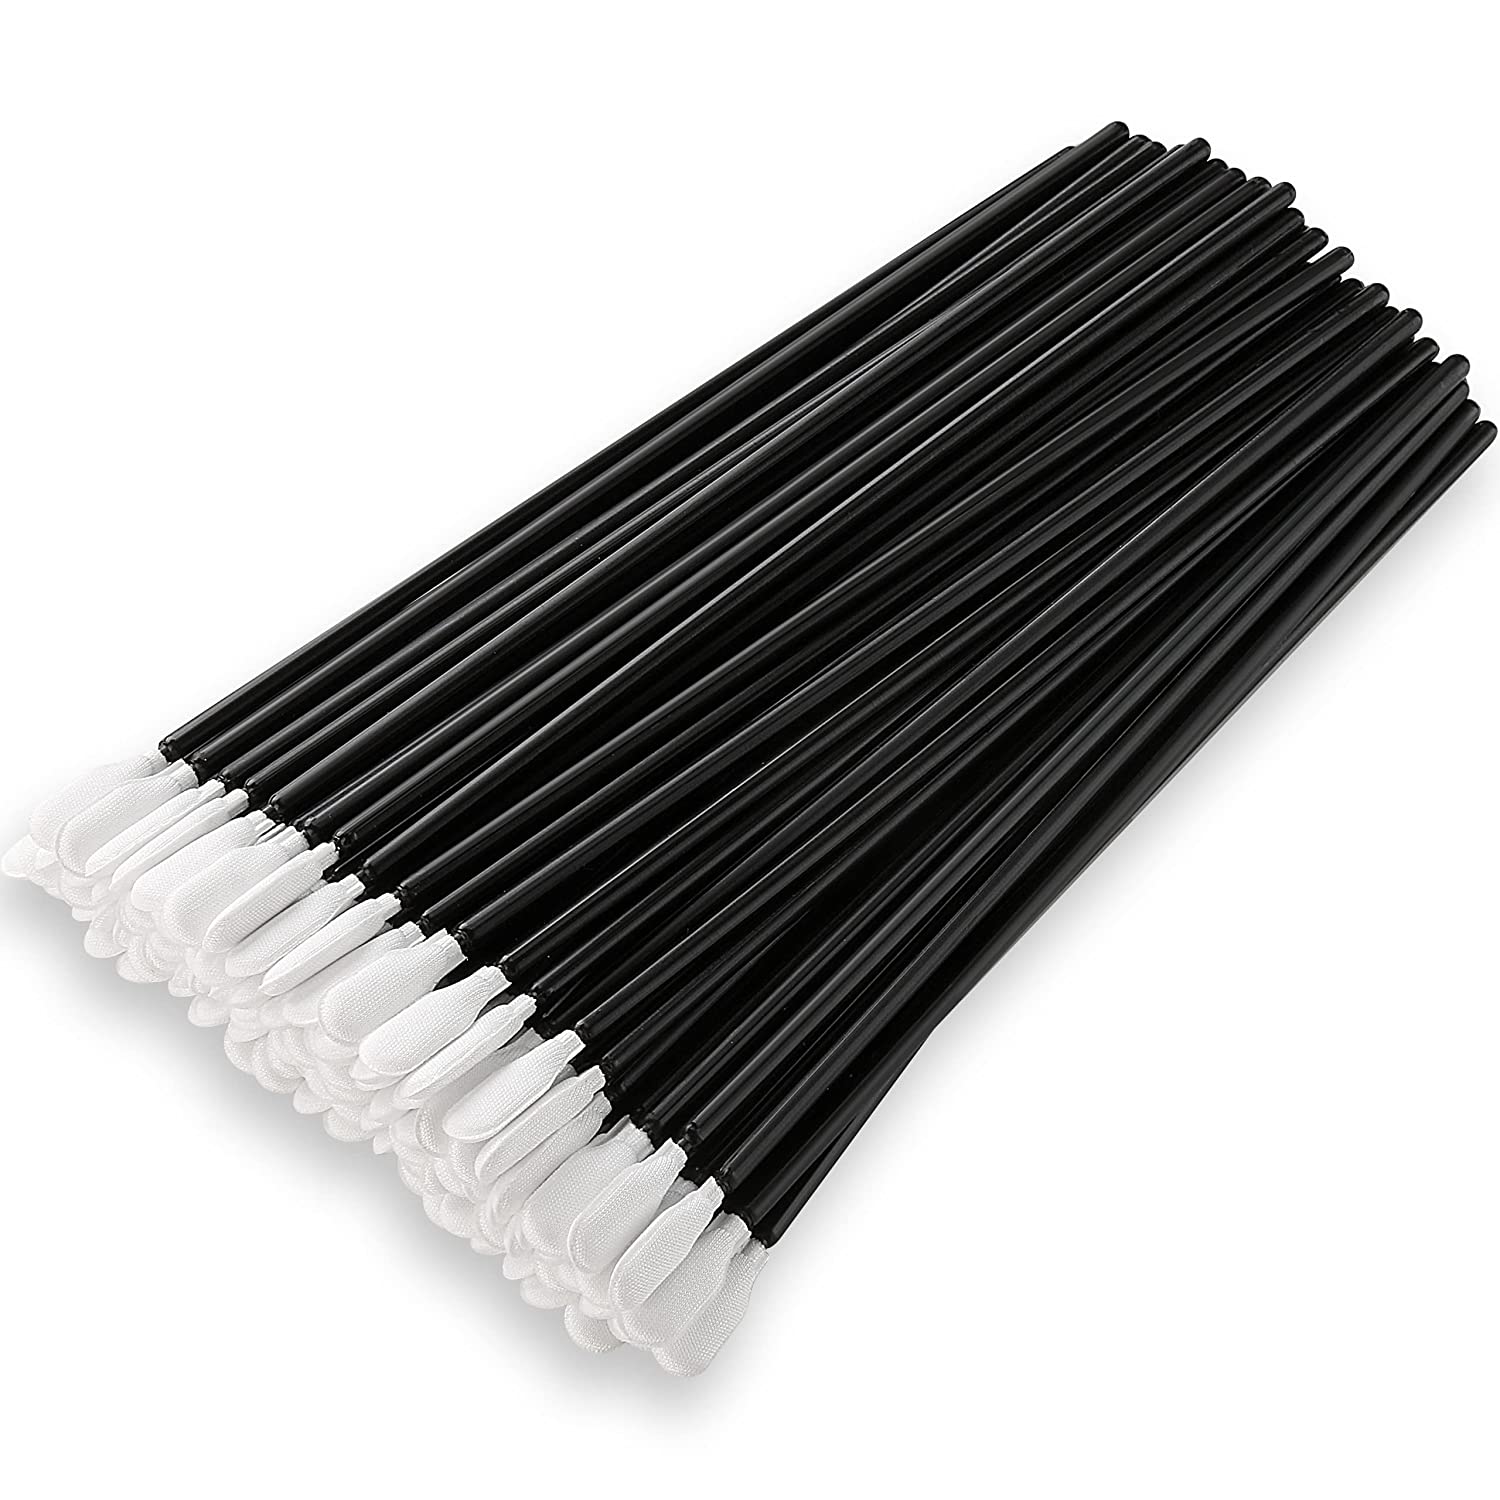 Lint Free Microfiber Cleaning Swabs with Long Handle (1,000 pcs, 6.3“, 6.8mm Head) (No. A857A)